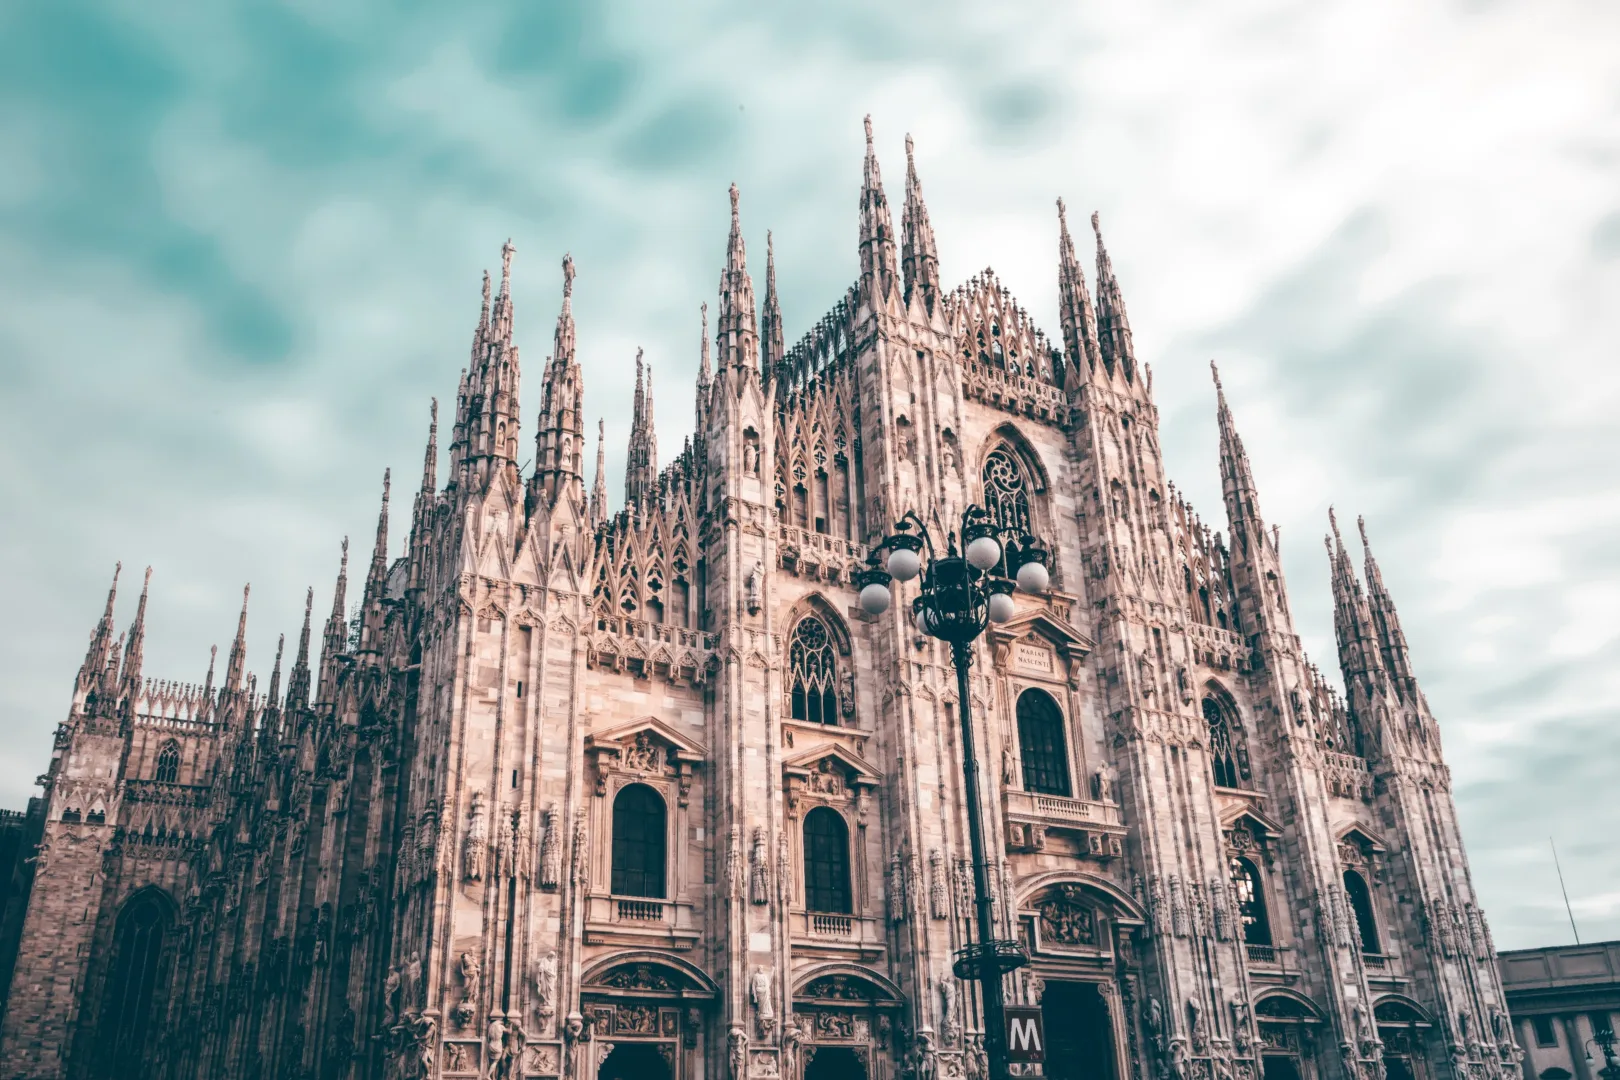 The breathtaking Duomo Milan, a Gothic architectural marvel, stands tall against the sky